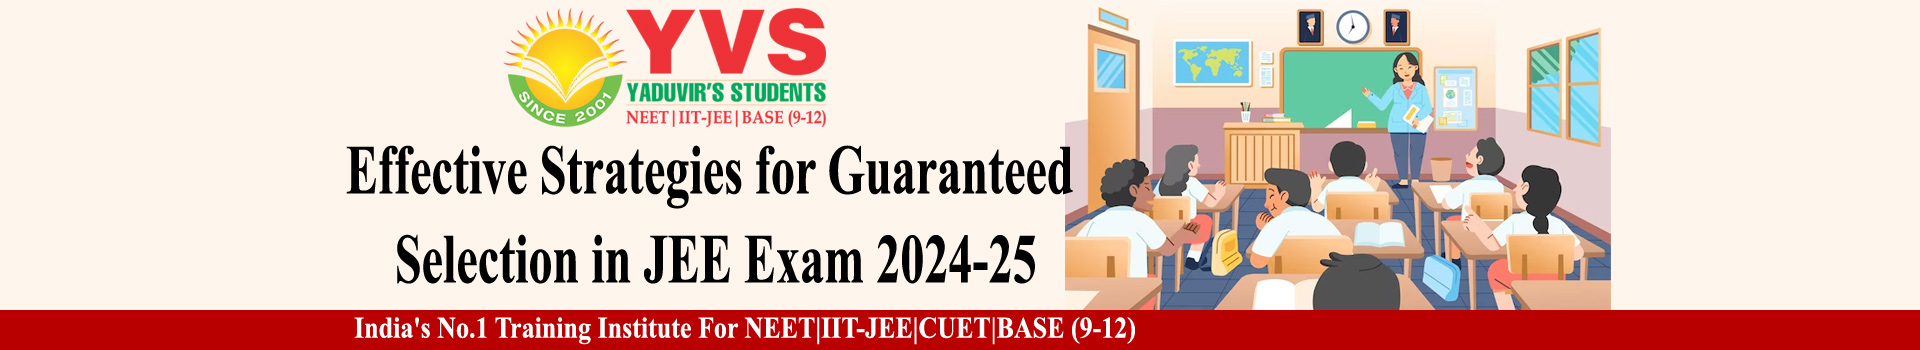 effective-strategies-for-guaranteed-selection-in-jee-exam-2023-24